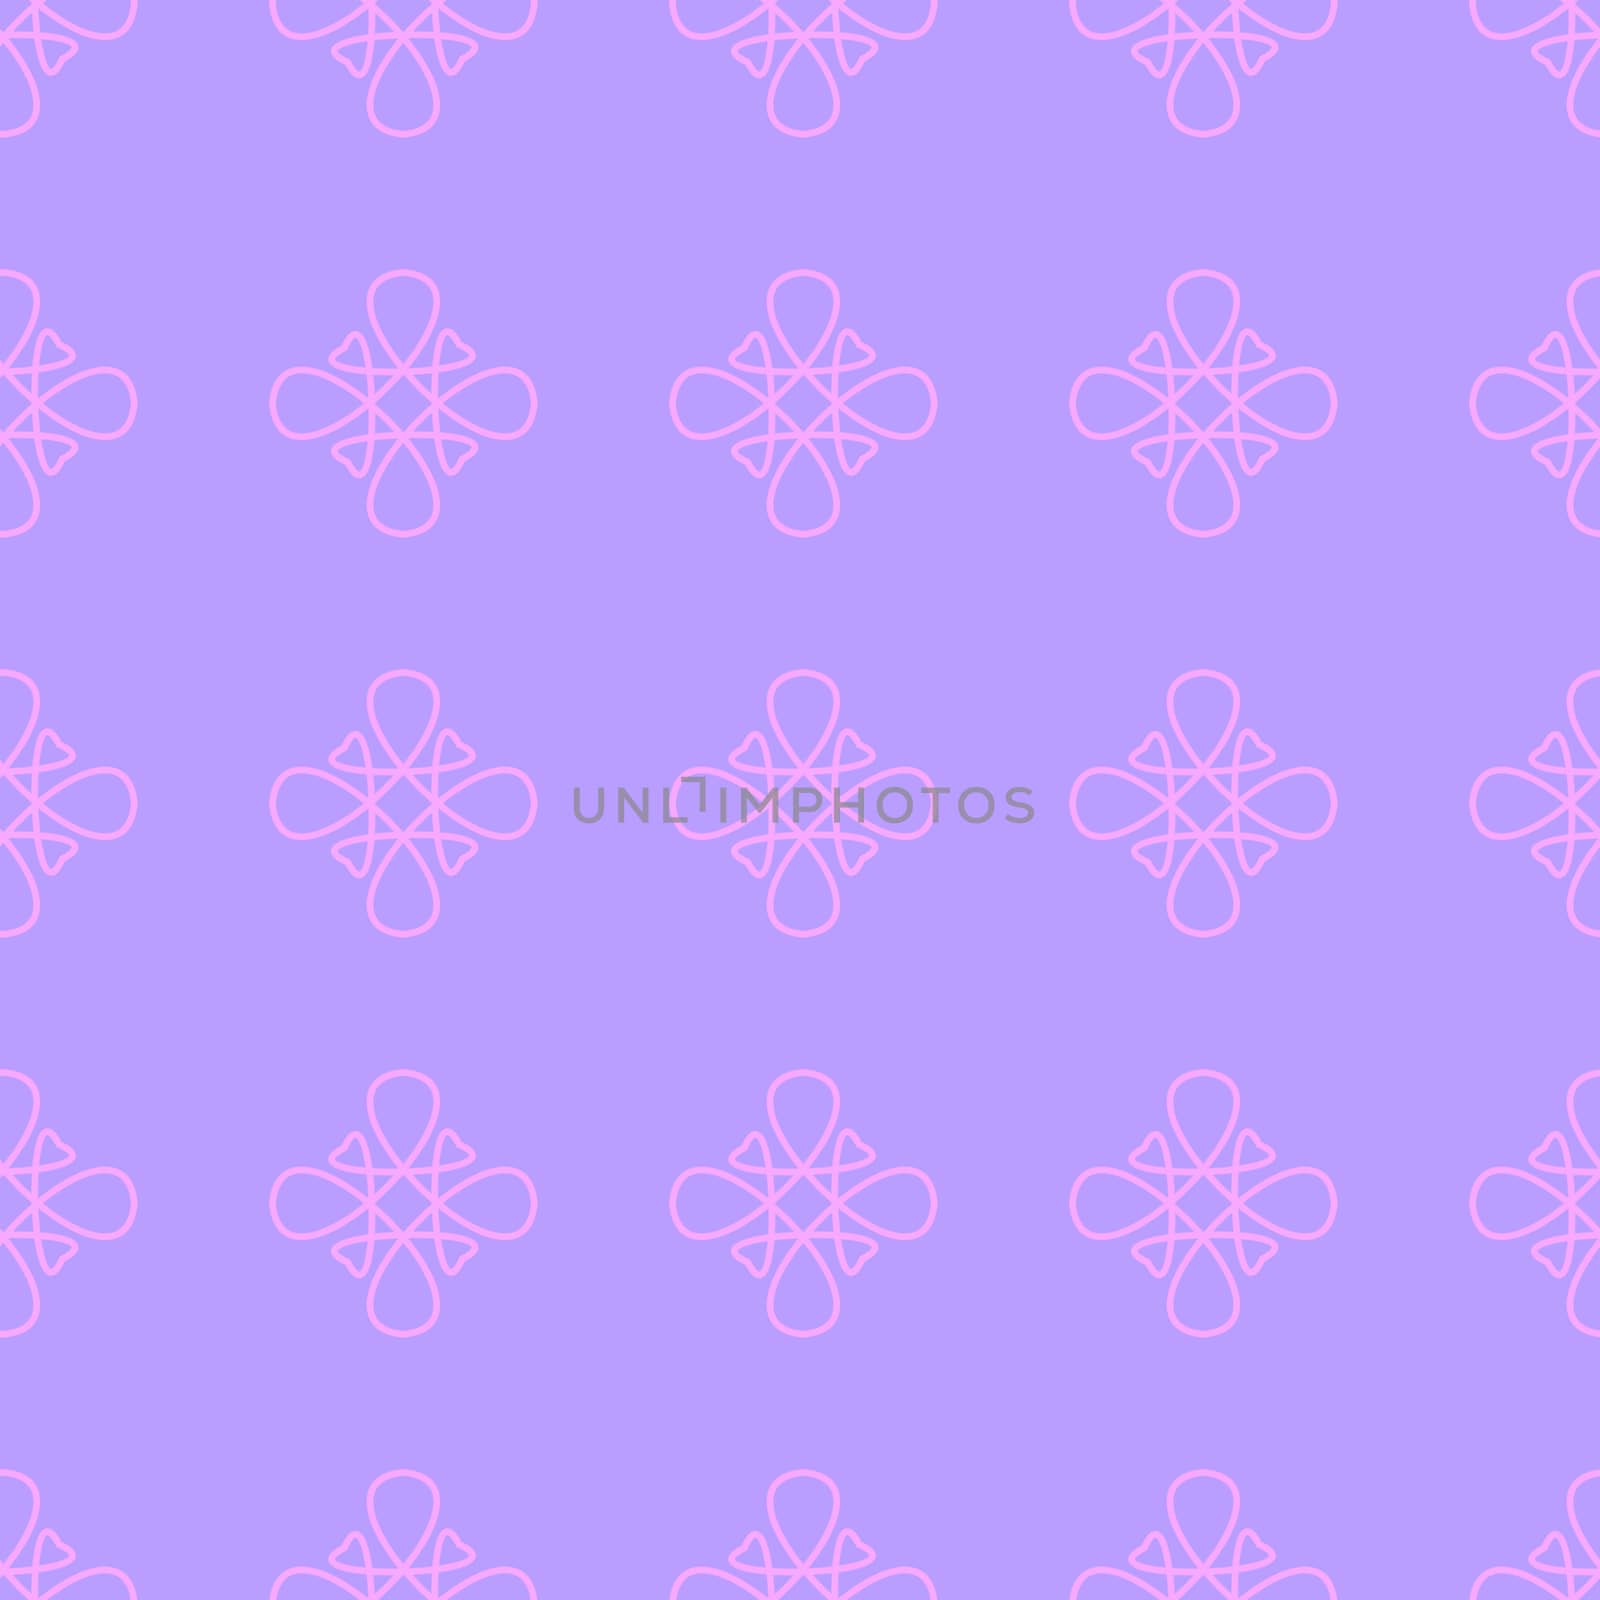 Seamless abstract vector pattern on the light violet background